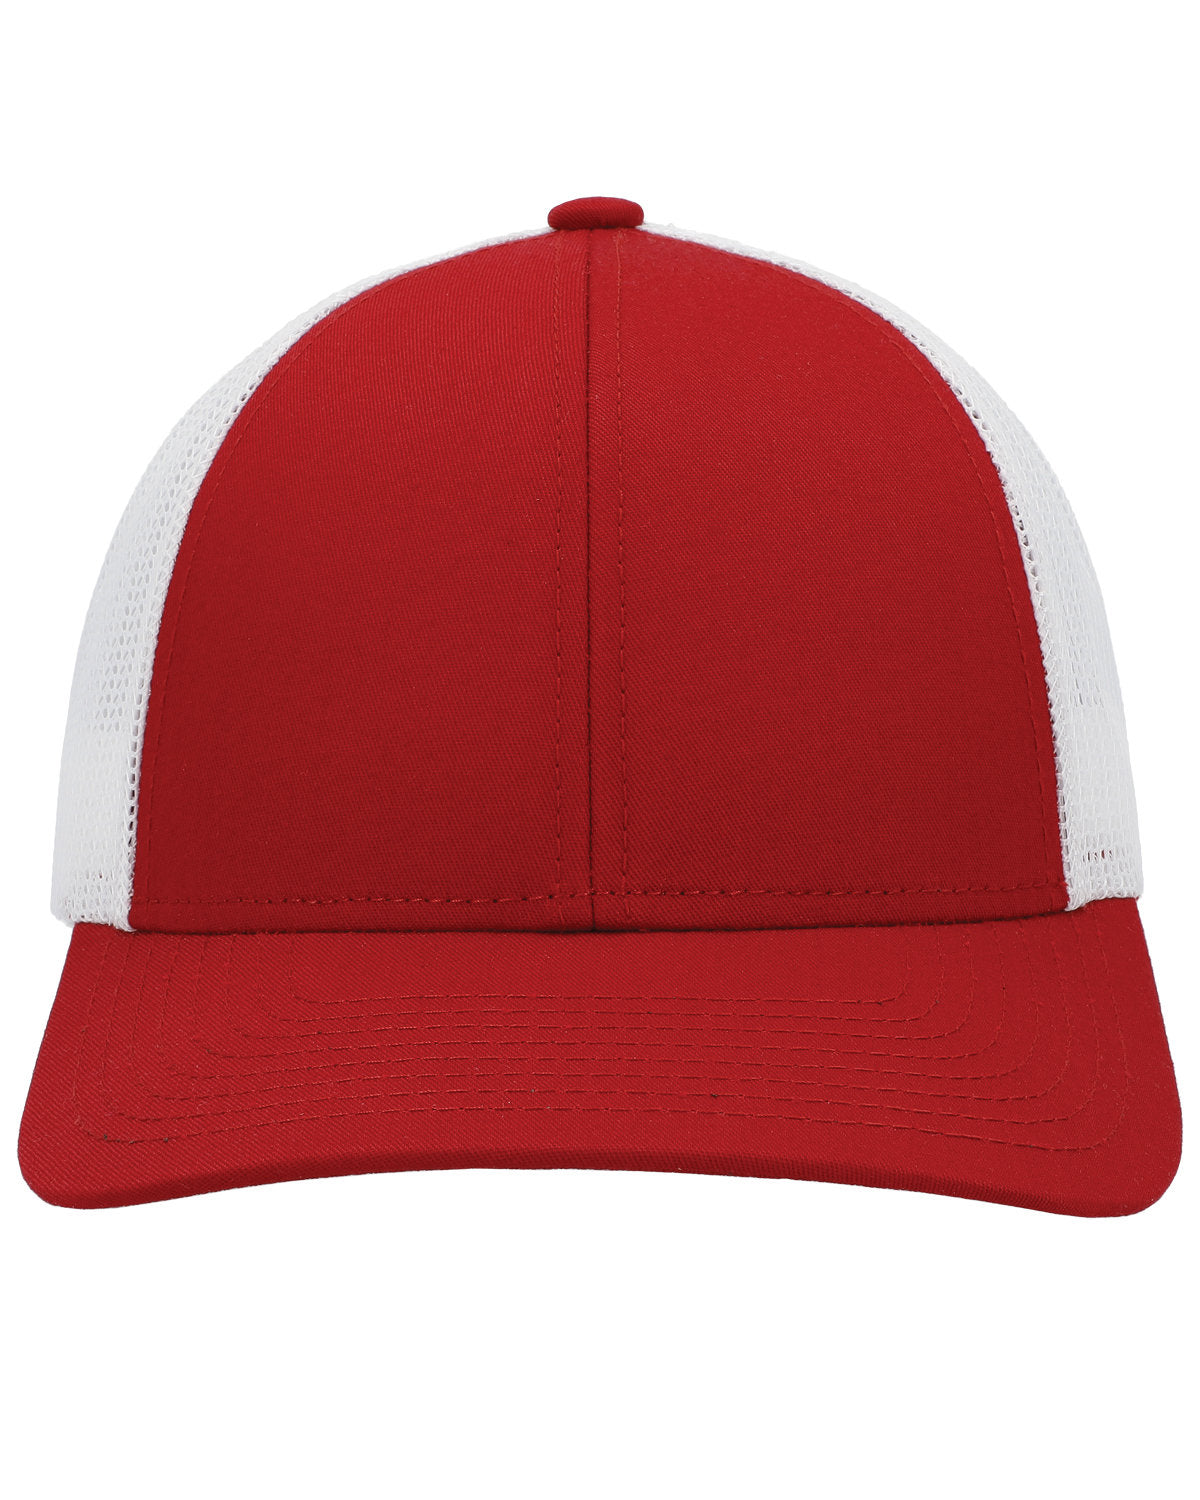 Headwear RED/ WHITE/ RED OS Pacific Headwear